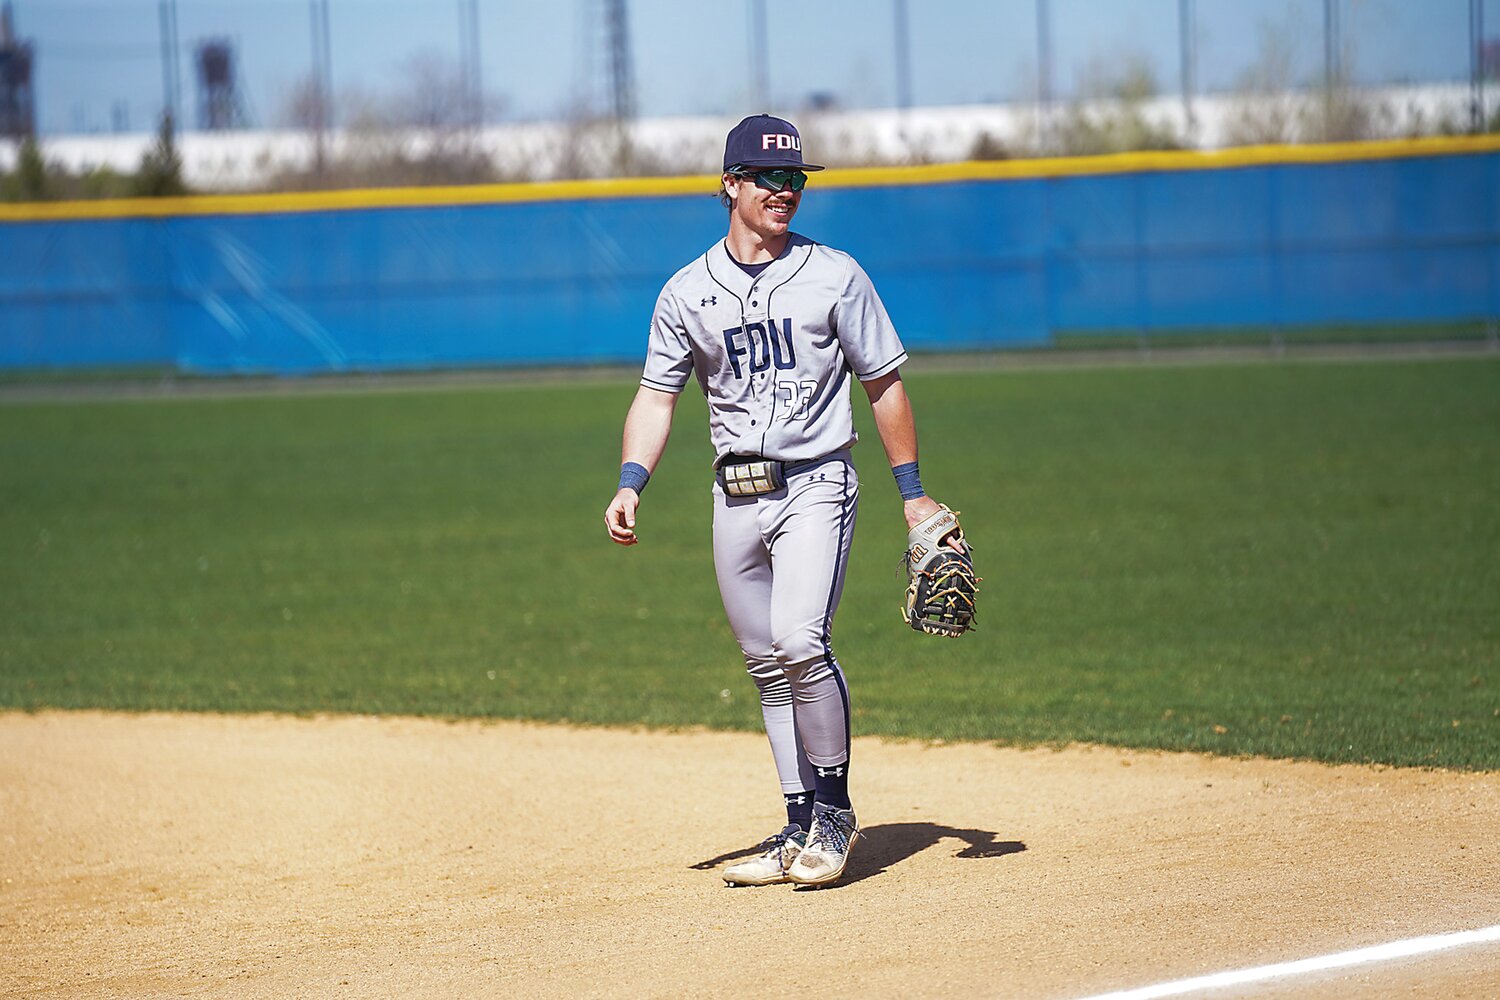 Sophomore Luke Cantwell, from Warrington and Archbishop Wood, was a first team All-NEC Conference pick. He hit .331 with 14 homers and 51 RBIs in the regular season.